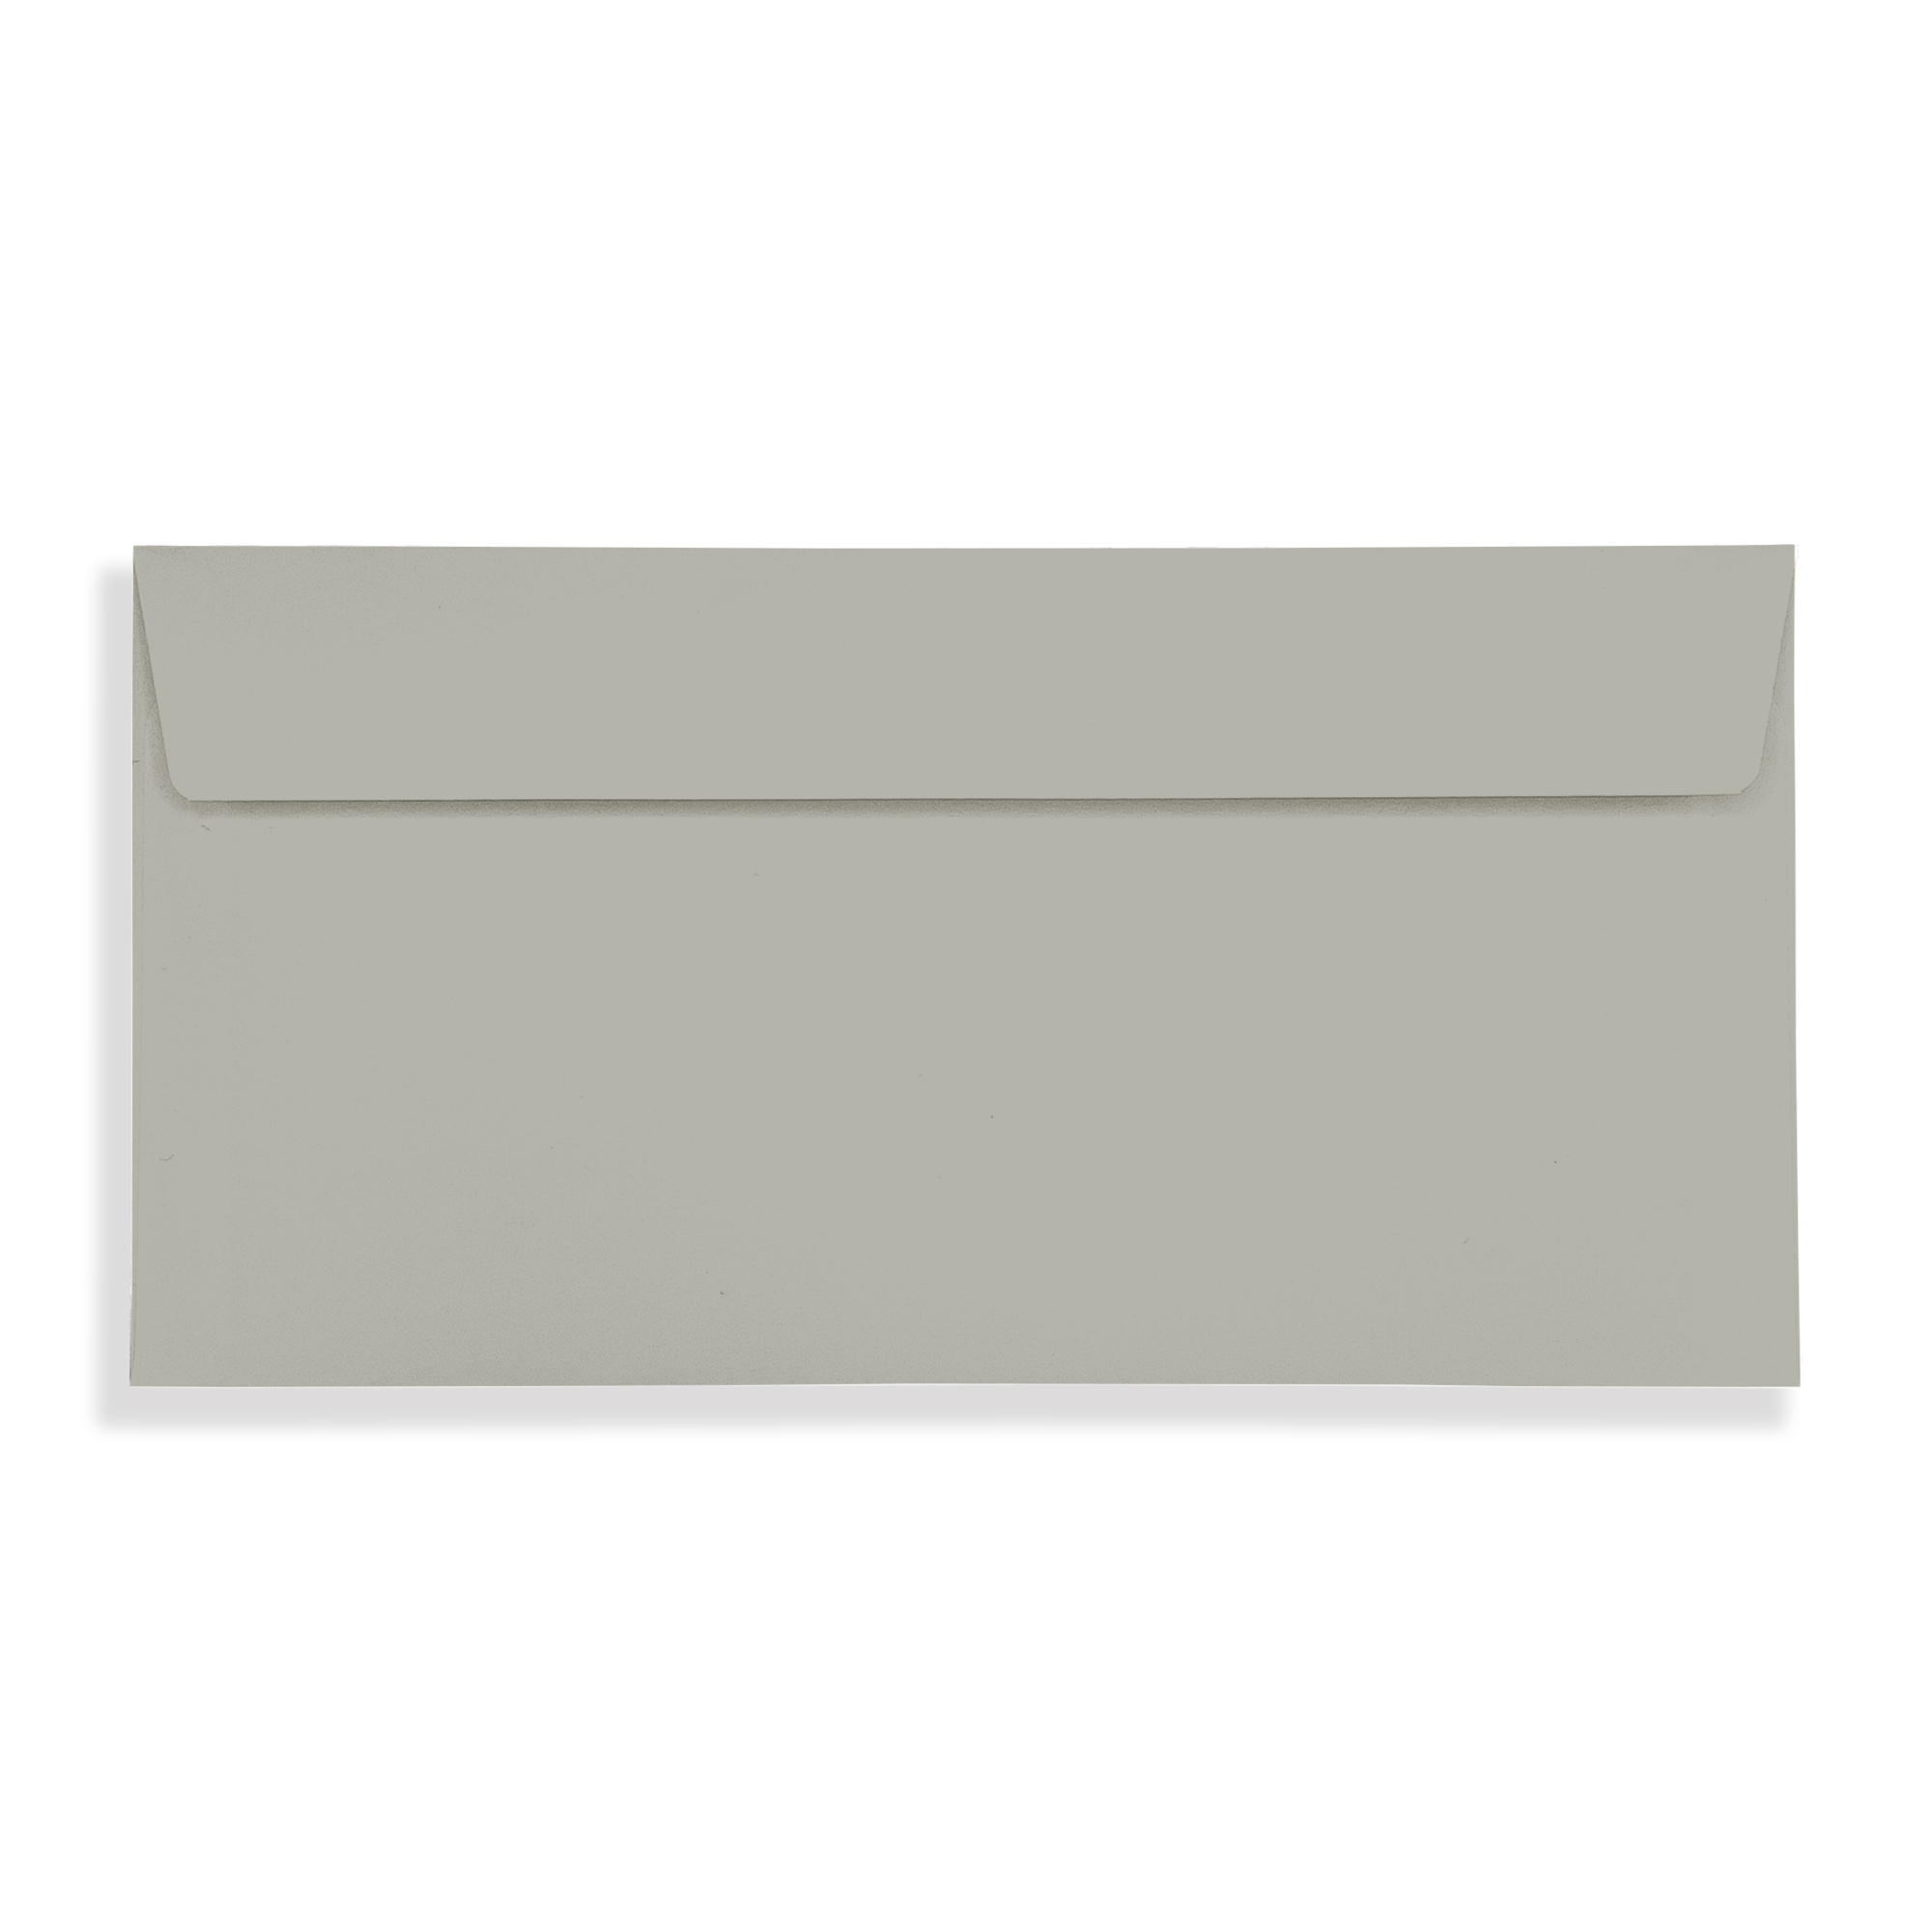 Storm Grey DL Peel and Seal Wallet Envelopes 120gsm Flap Closed